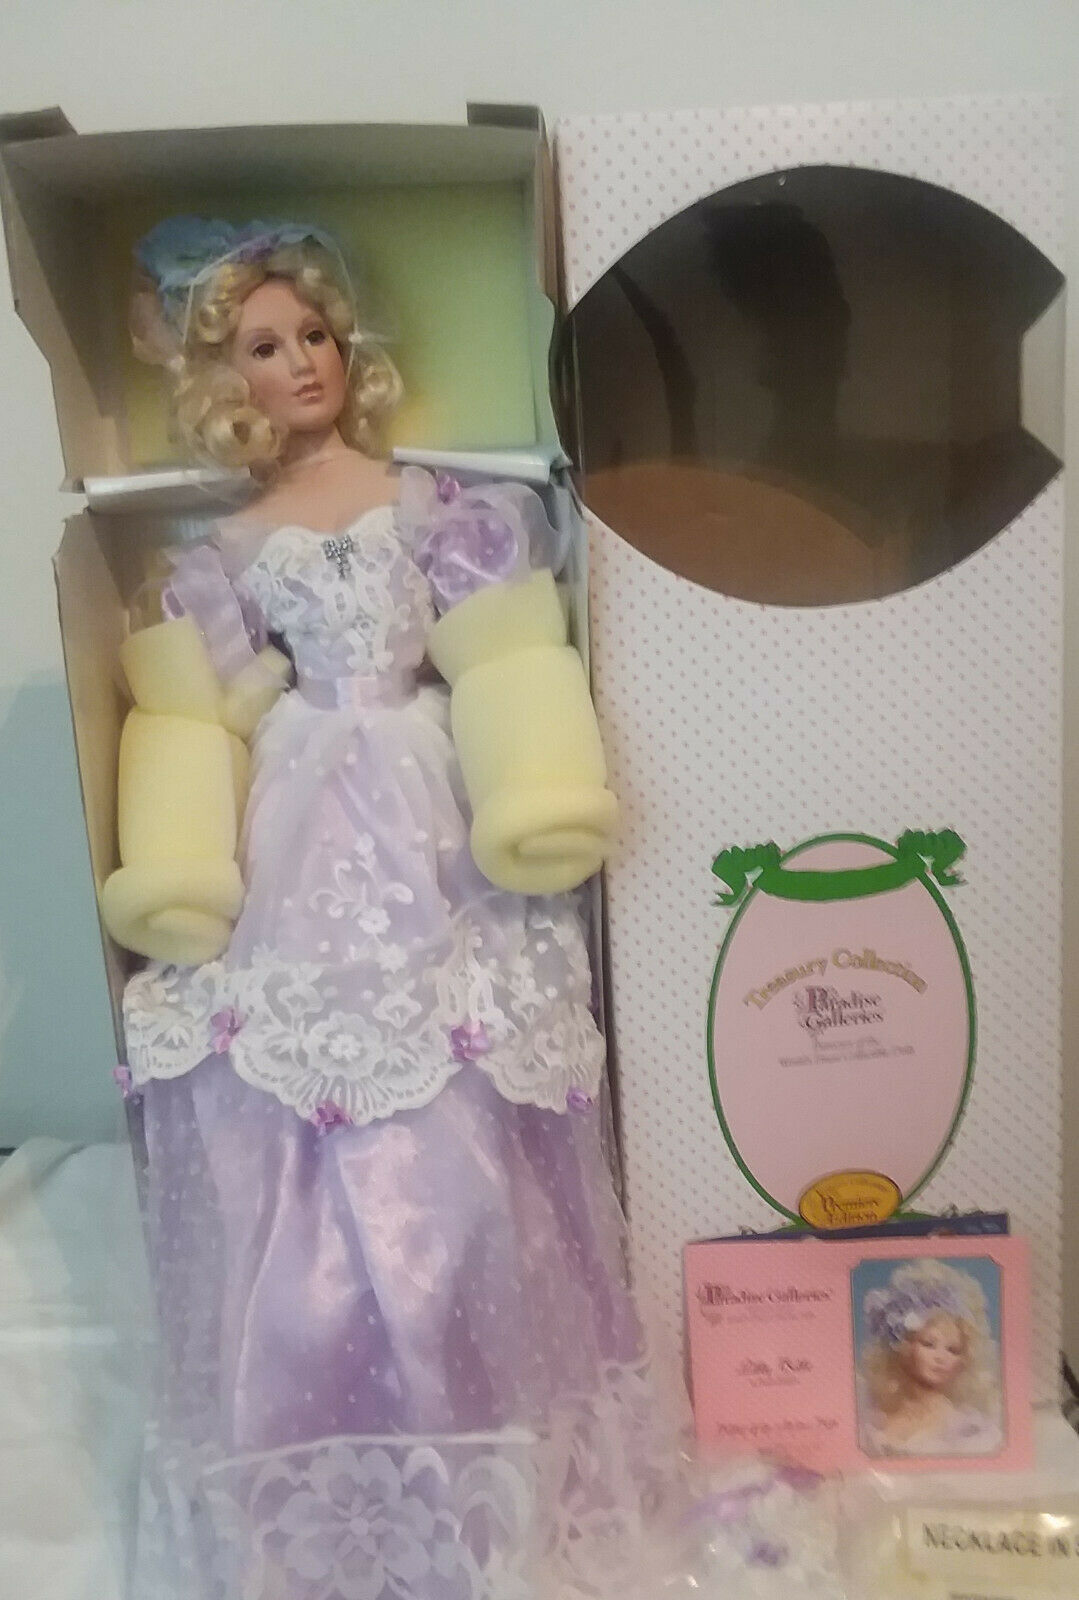 Paradise Galleries Lilly Belle Porcelain Doll By Donna Rubert-nib/nrfb